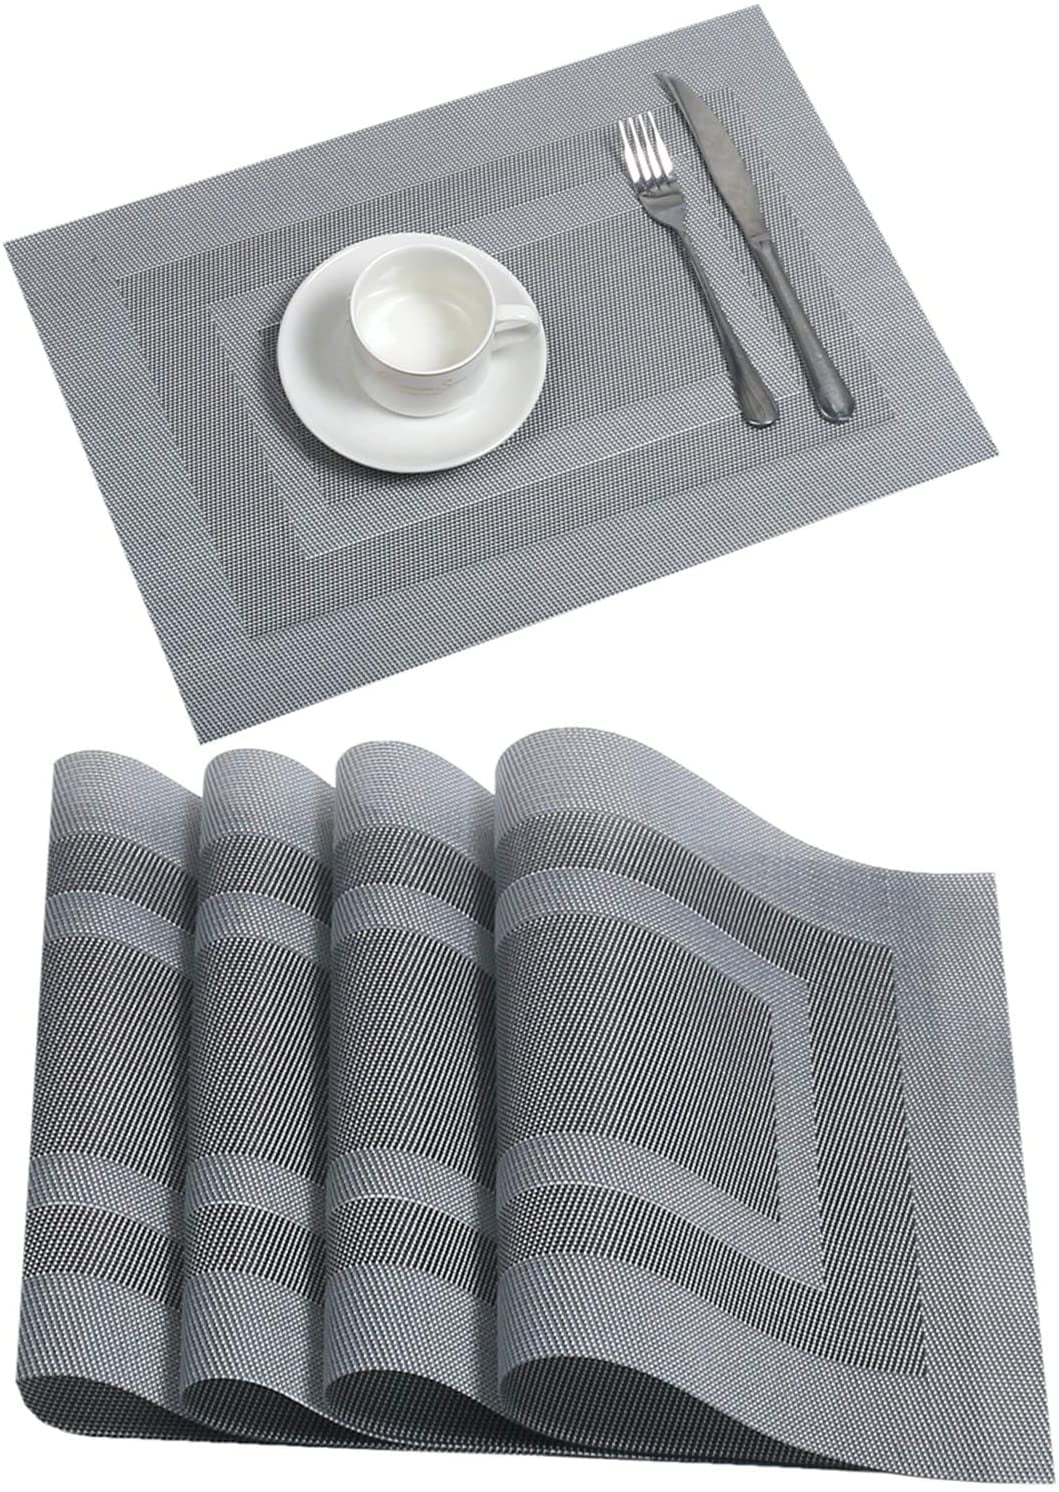 SET OF 4 PLACEMATS SILVER GLITTER HOME FAMILY TABLE WIPE CLEAN PLACE MAT COASTER 